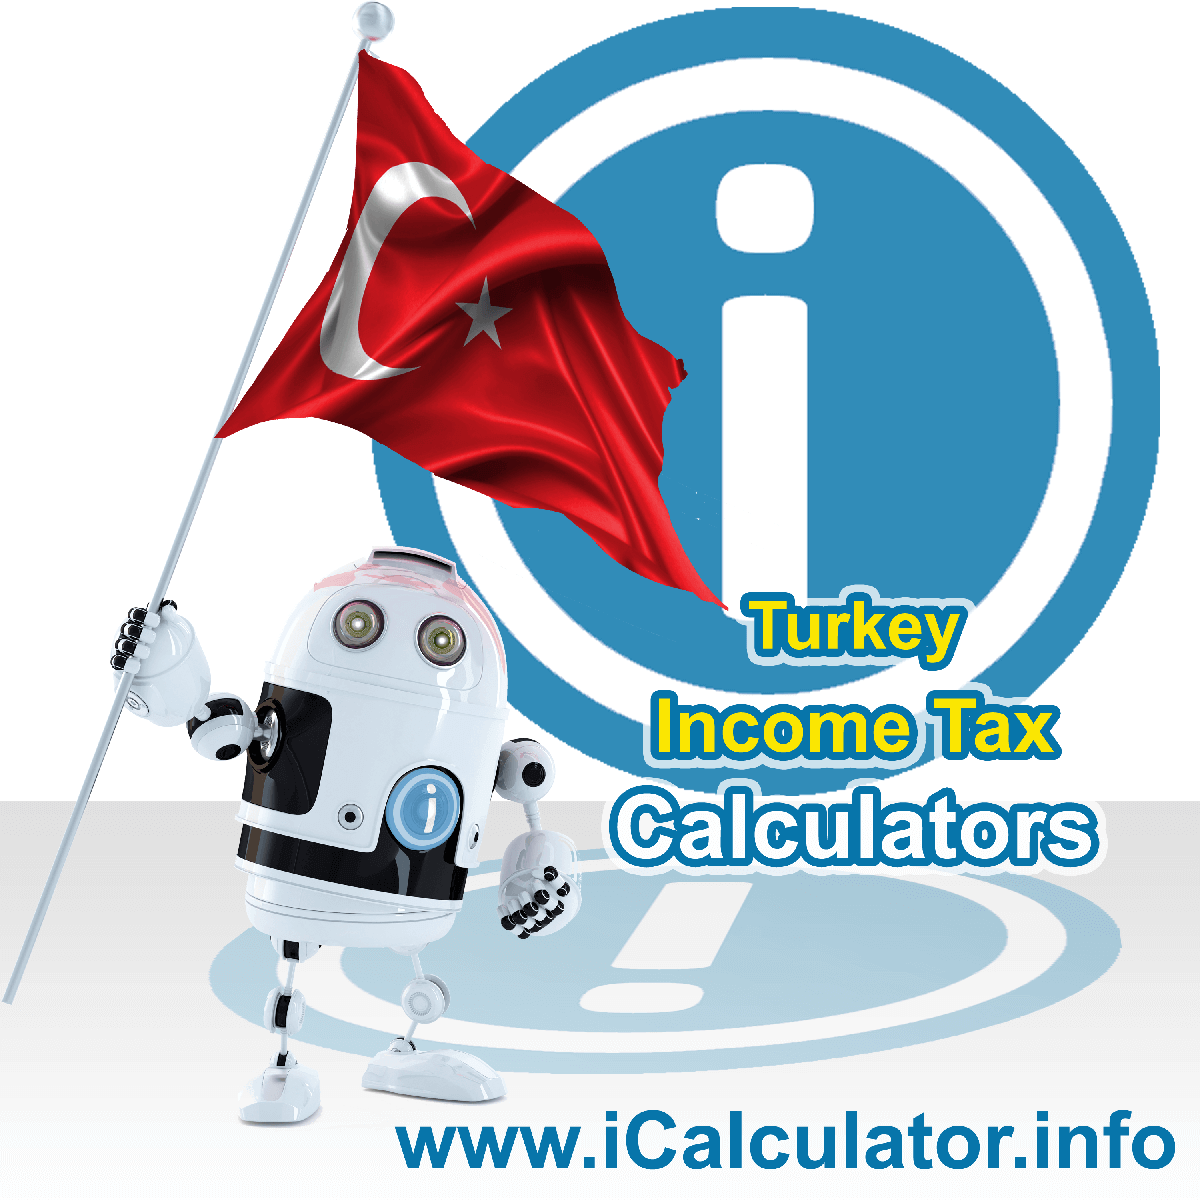 Turkey Income Tax Calculator. This image shows a new employer in Turkey calculating the annual payroll costs based on multiple payroll payments in one year in Turkey using the Turkey income tax calculator to understand their payroll costs in Turkey in 2023